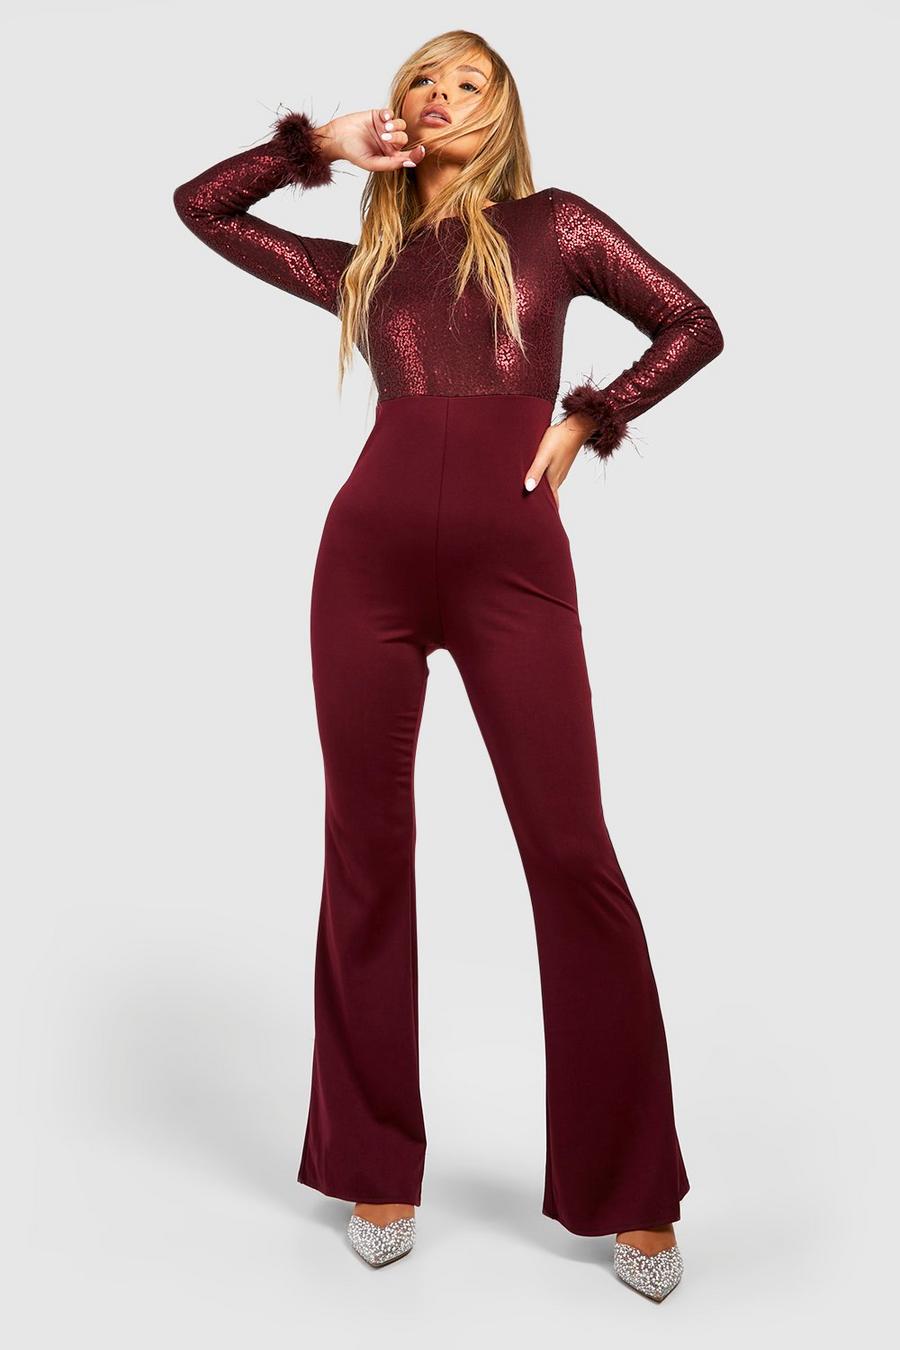 Wine red Feather Cuff Sequin Jumpsuit